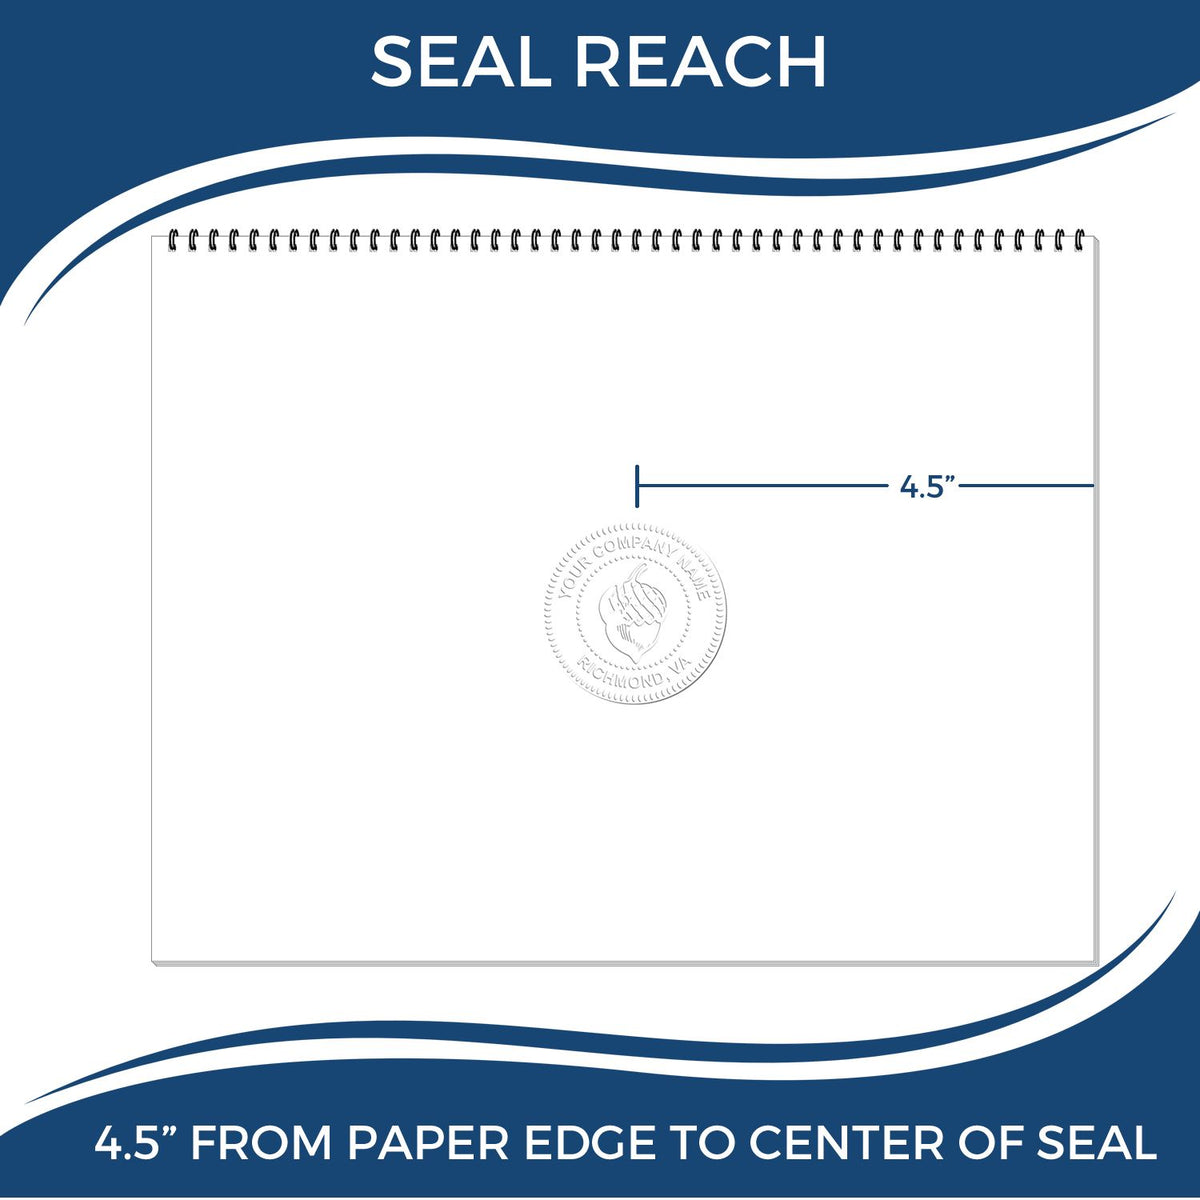 An infographic showing the seal reach which is represented by a ruler and a miniature seal image of the State of Missouri Extended Long Reach Geologist Seal